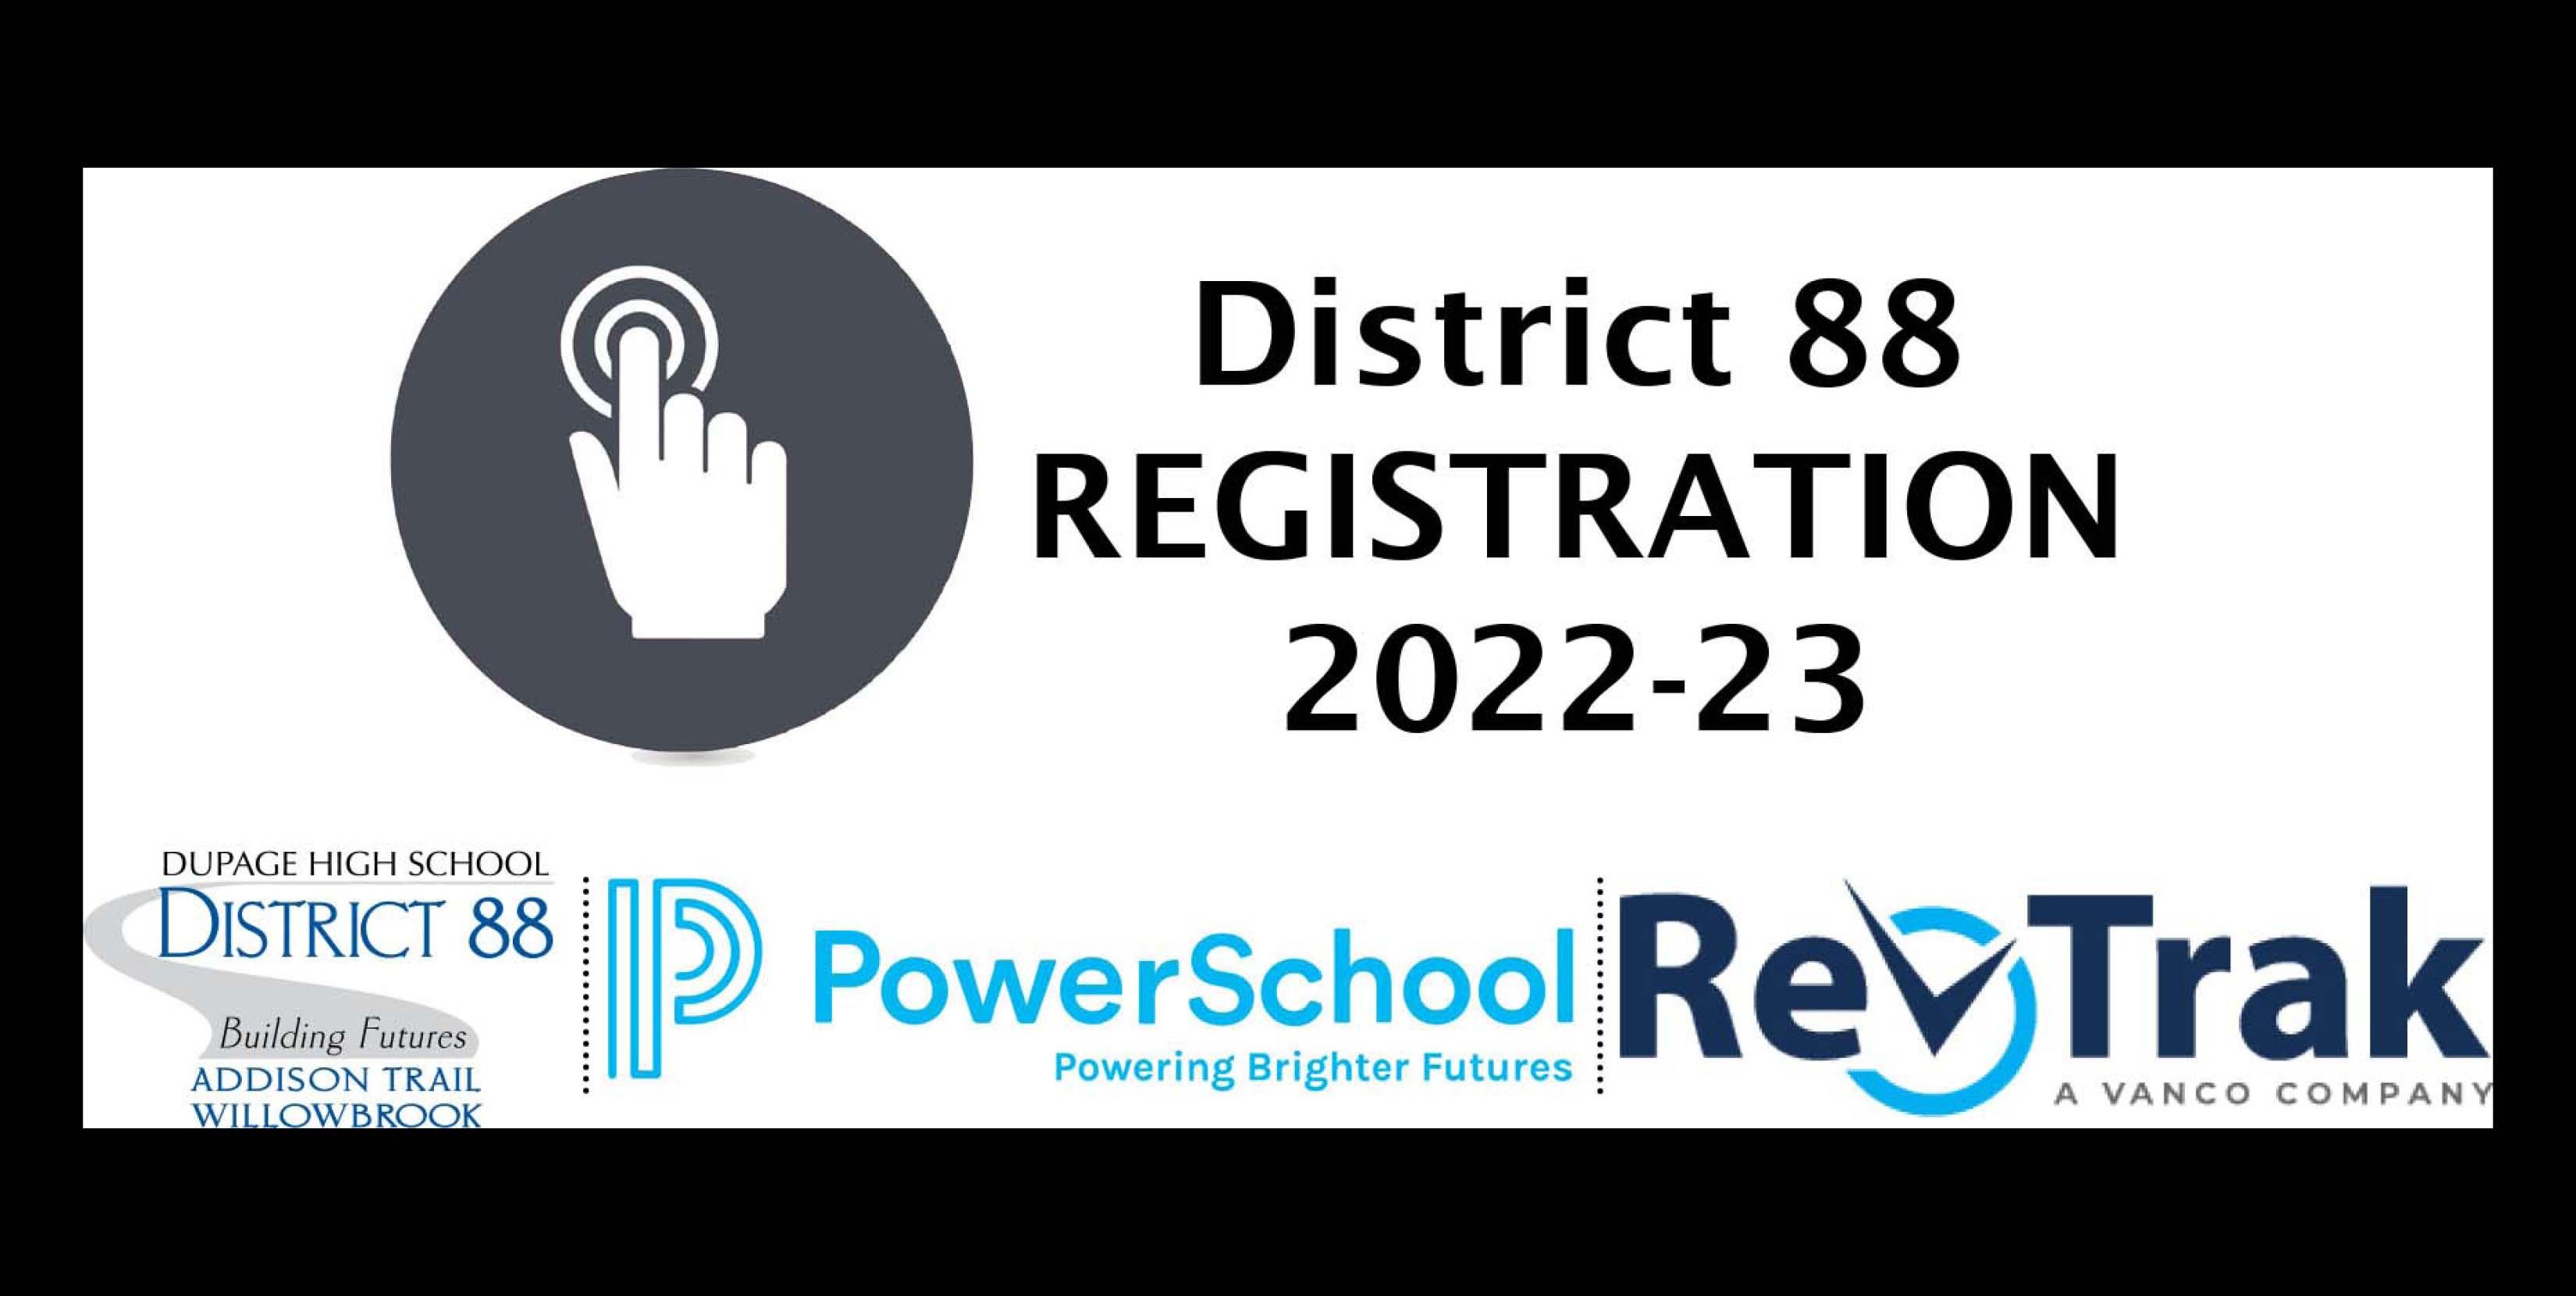 Registration and residency verification for the 2022-23 school year